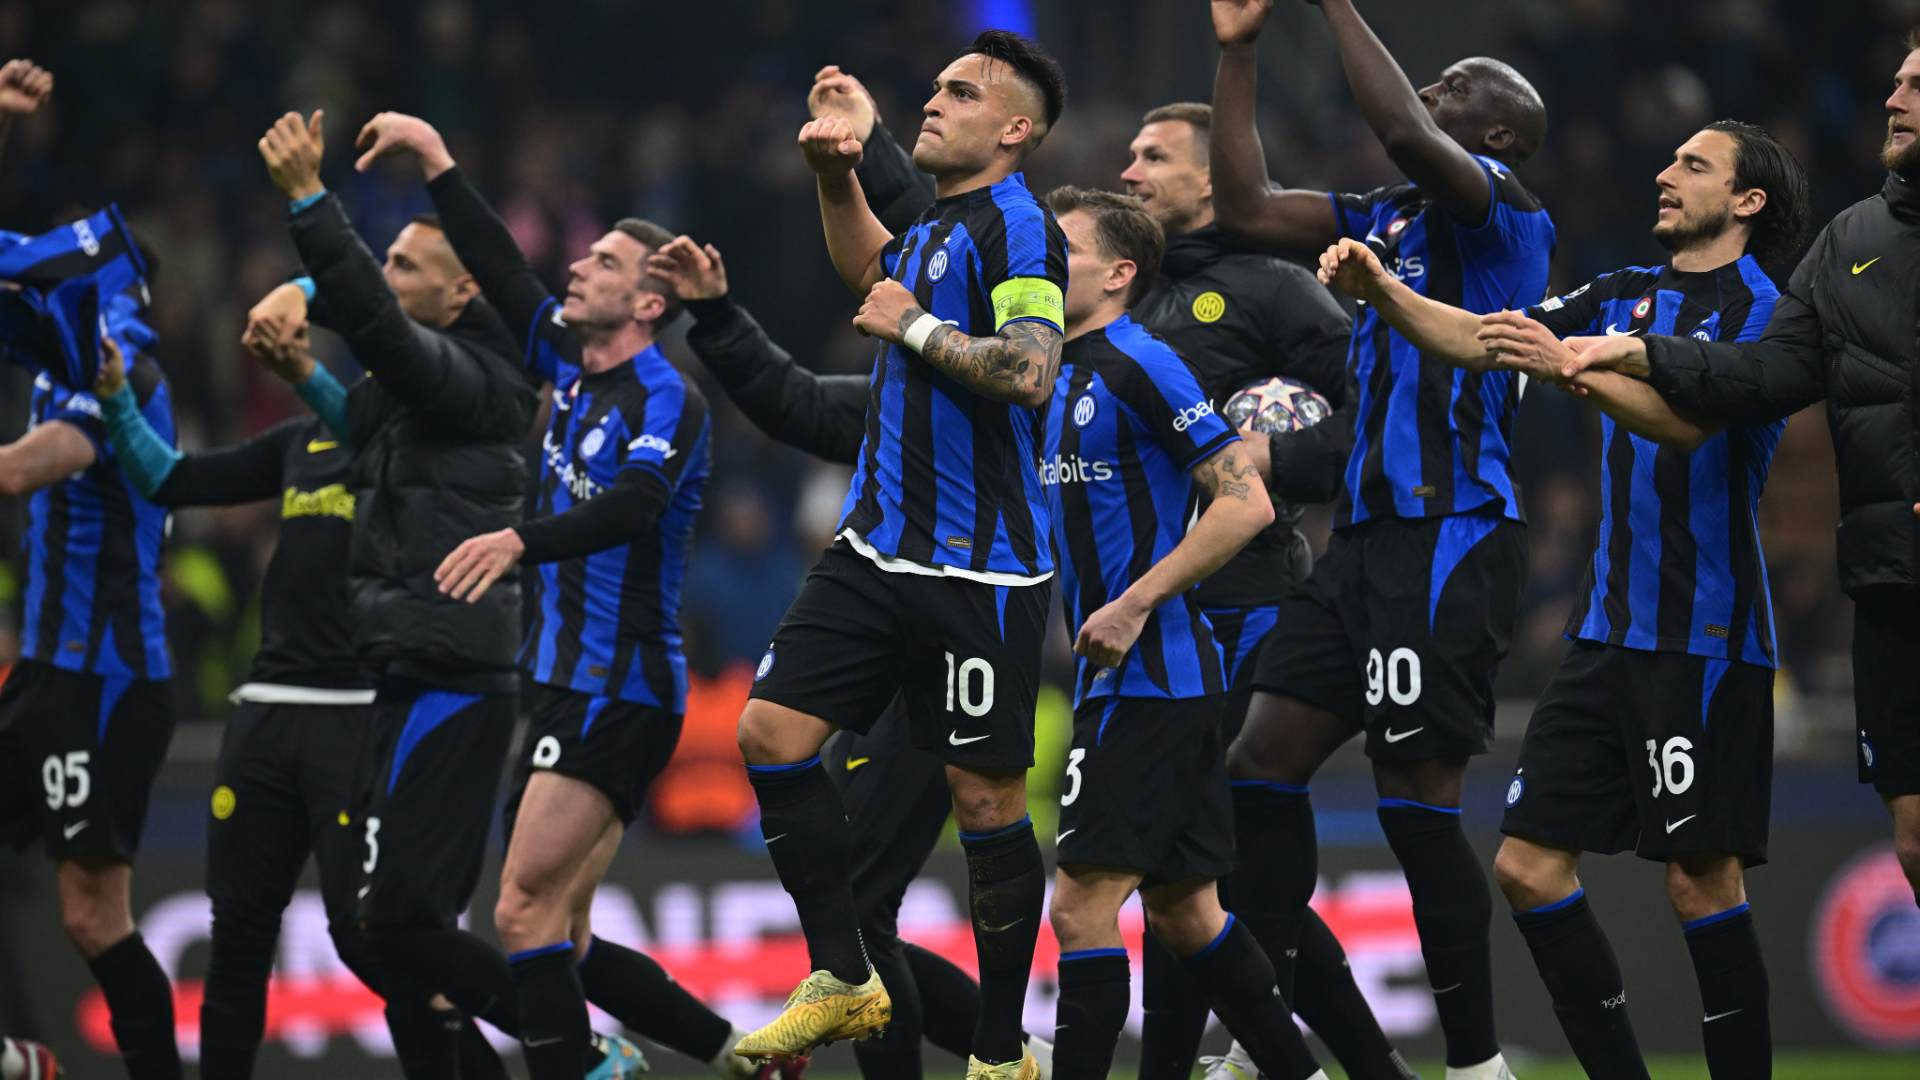 Inter Milan vs Lecce Serie A Live Stream, Form Guide, Head to Head, Schedule, Fixture and